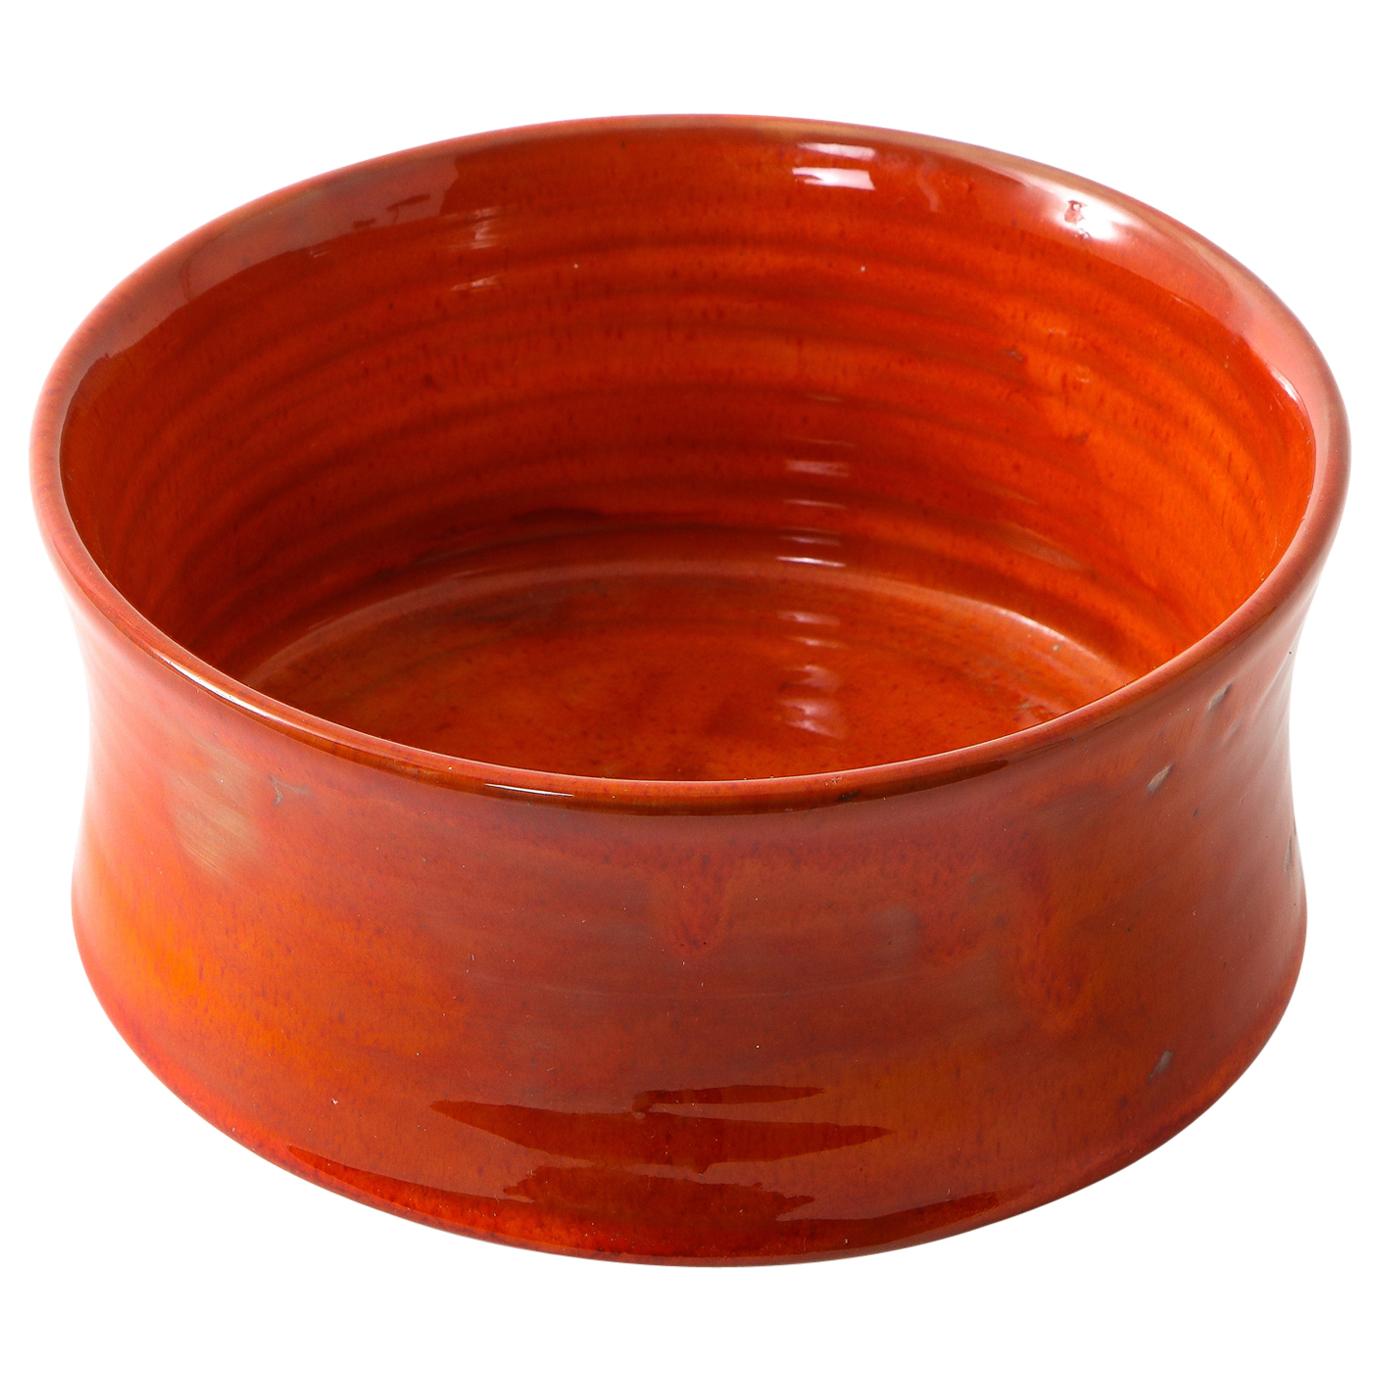 Red Bowl by Robert and Jean Cloutier, France, 1970s